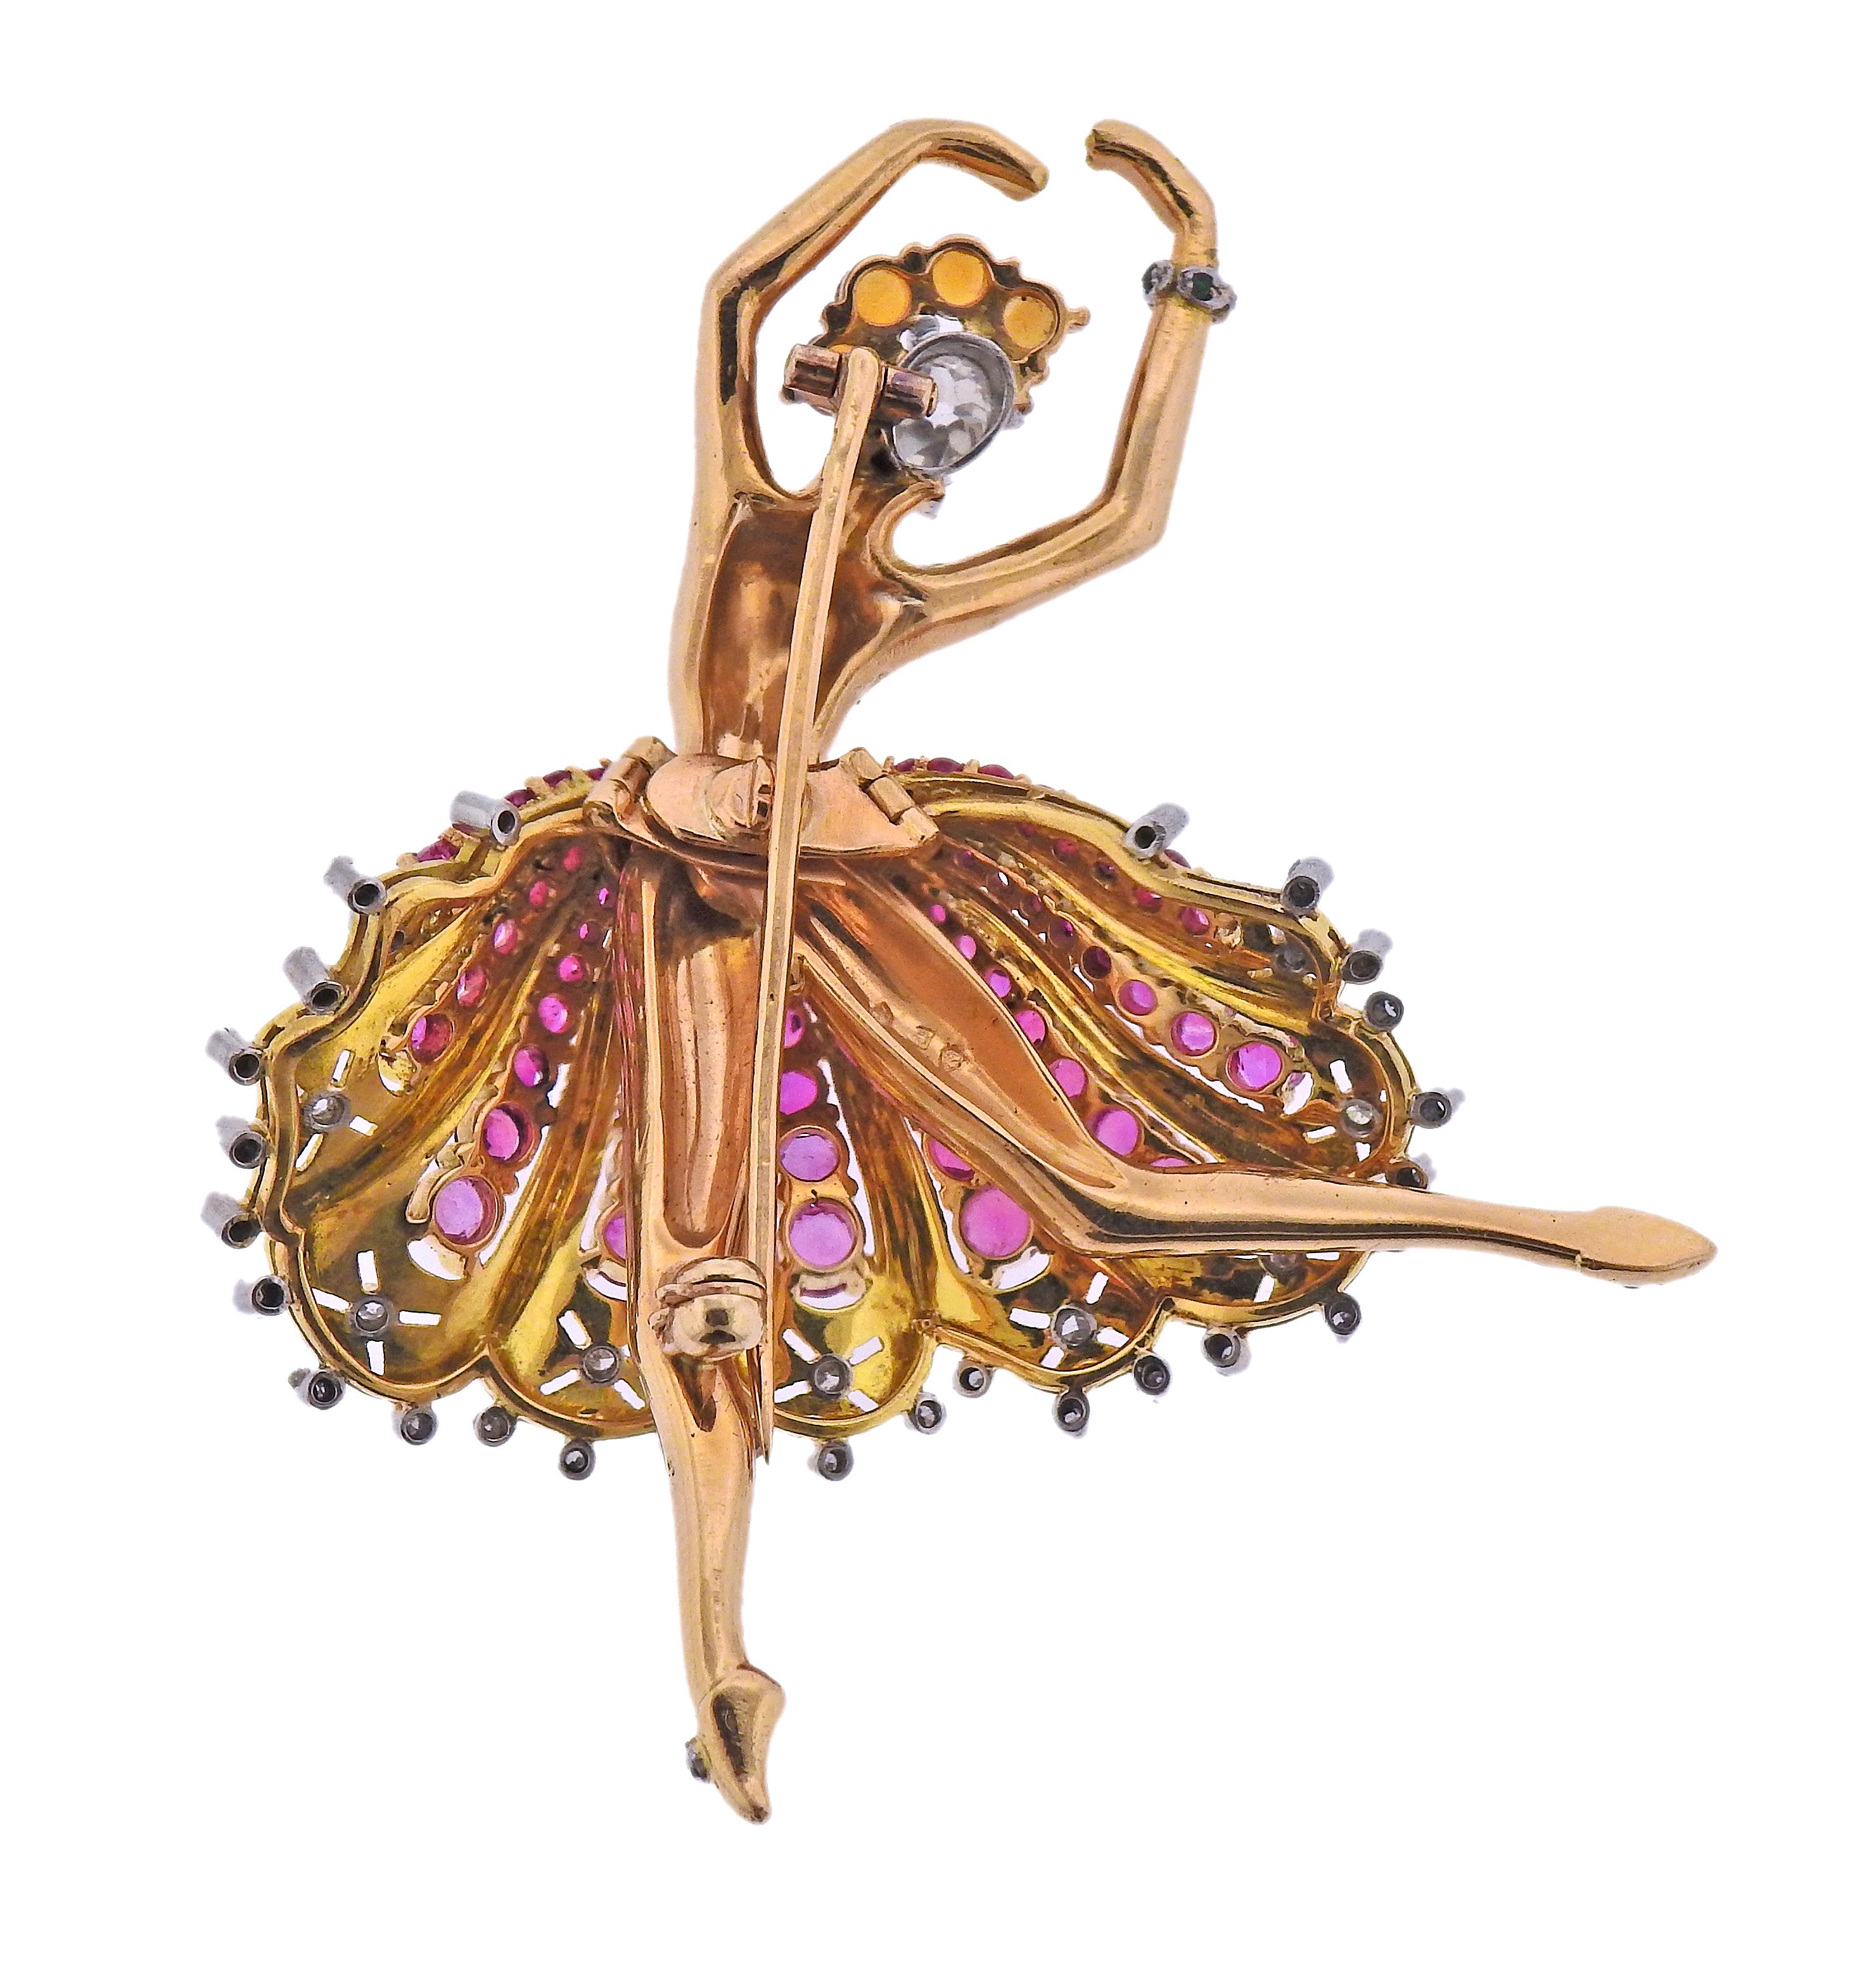 Retro circa 1940s, French made ballerina 18k gold brooch, adorned with rubies, citrines and approx. 0.60ctw in diamonds (center large stone is approx. 0.40-0.44ct). Brooch is 2.5